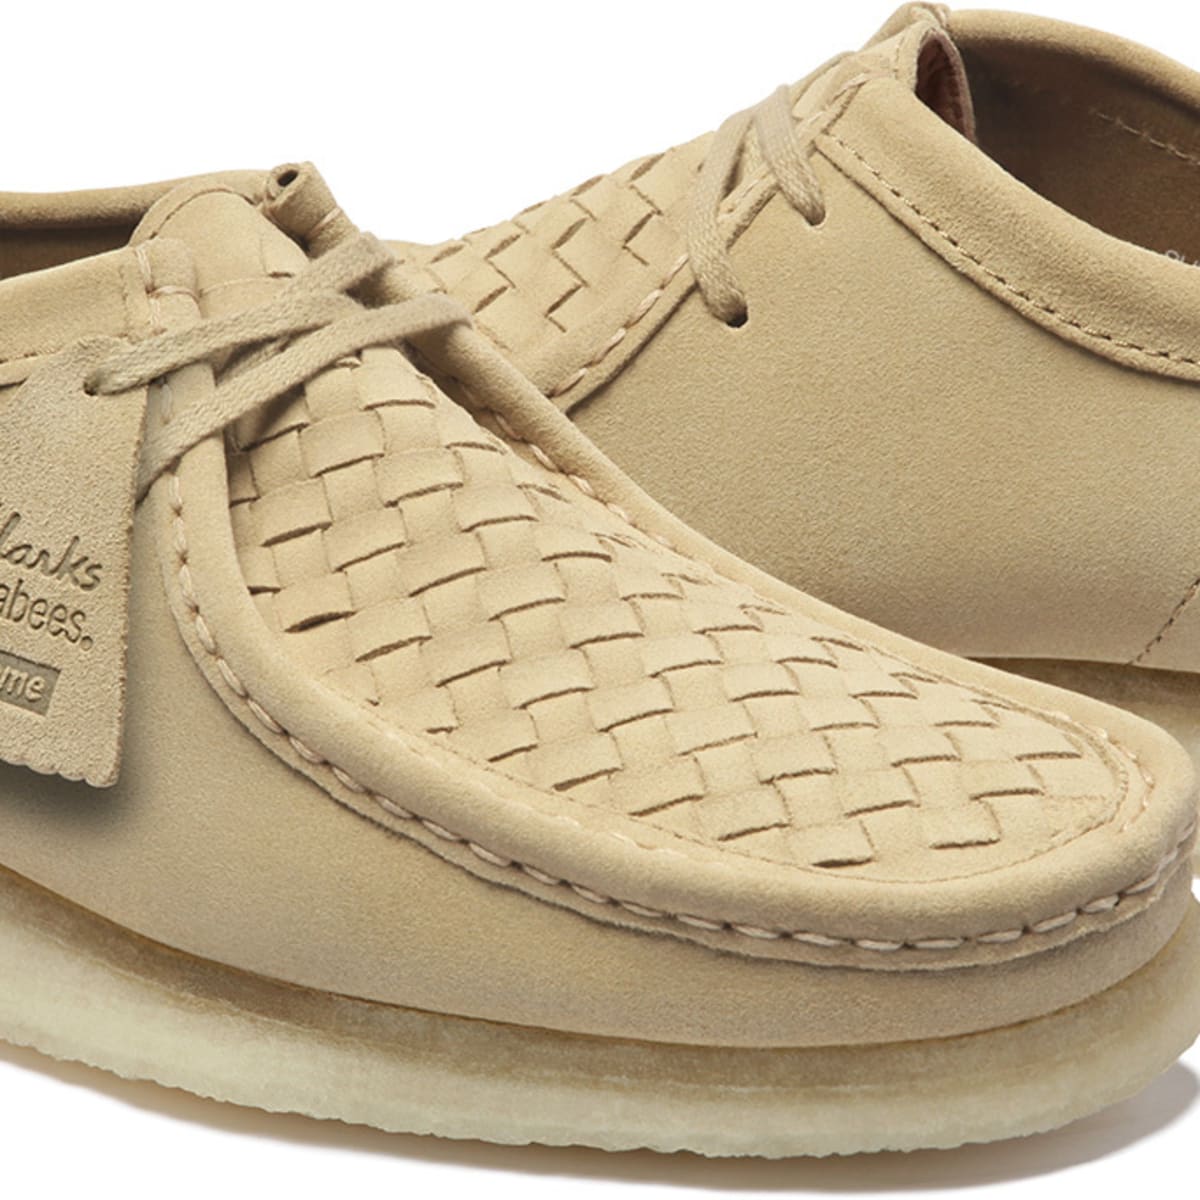 Supreme is back with Clarks once again for an updated Wallabee 